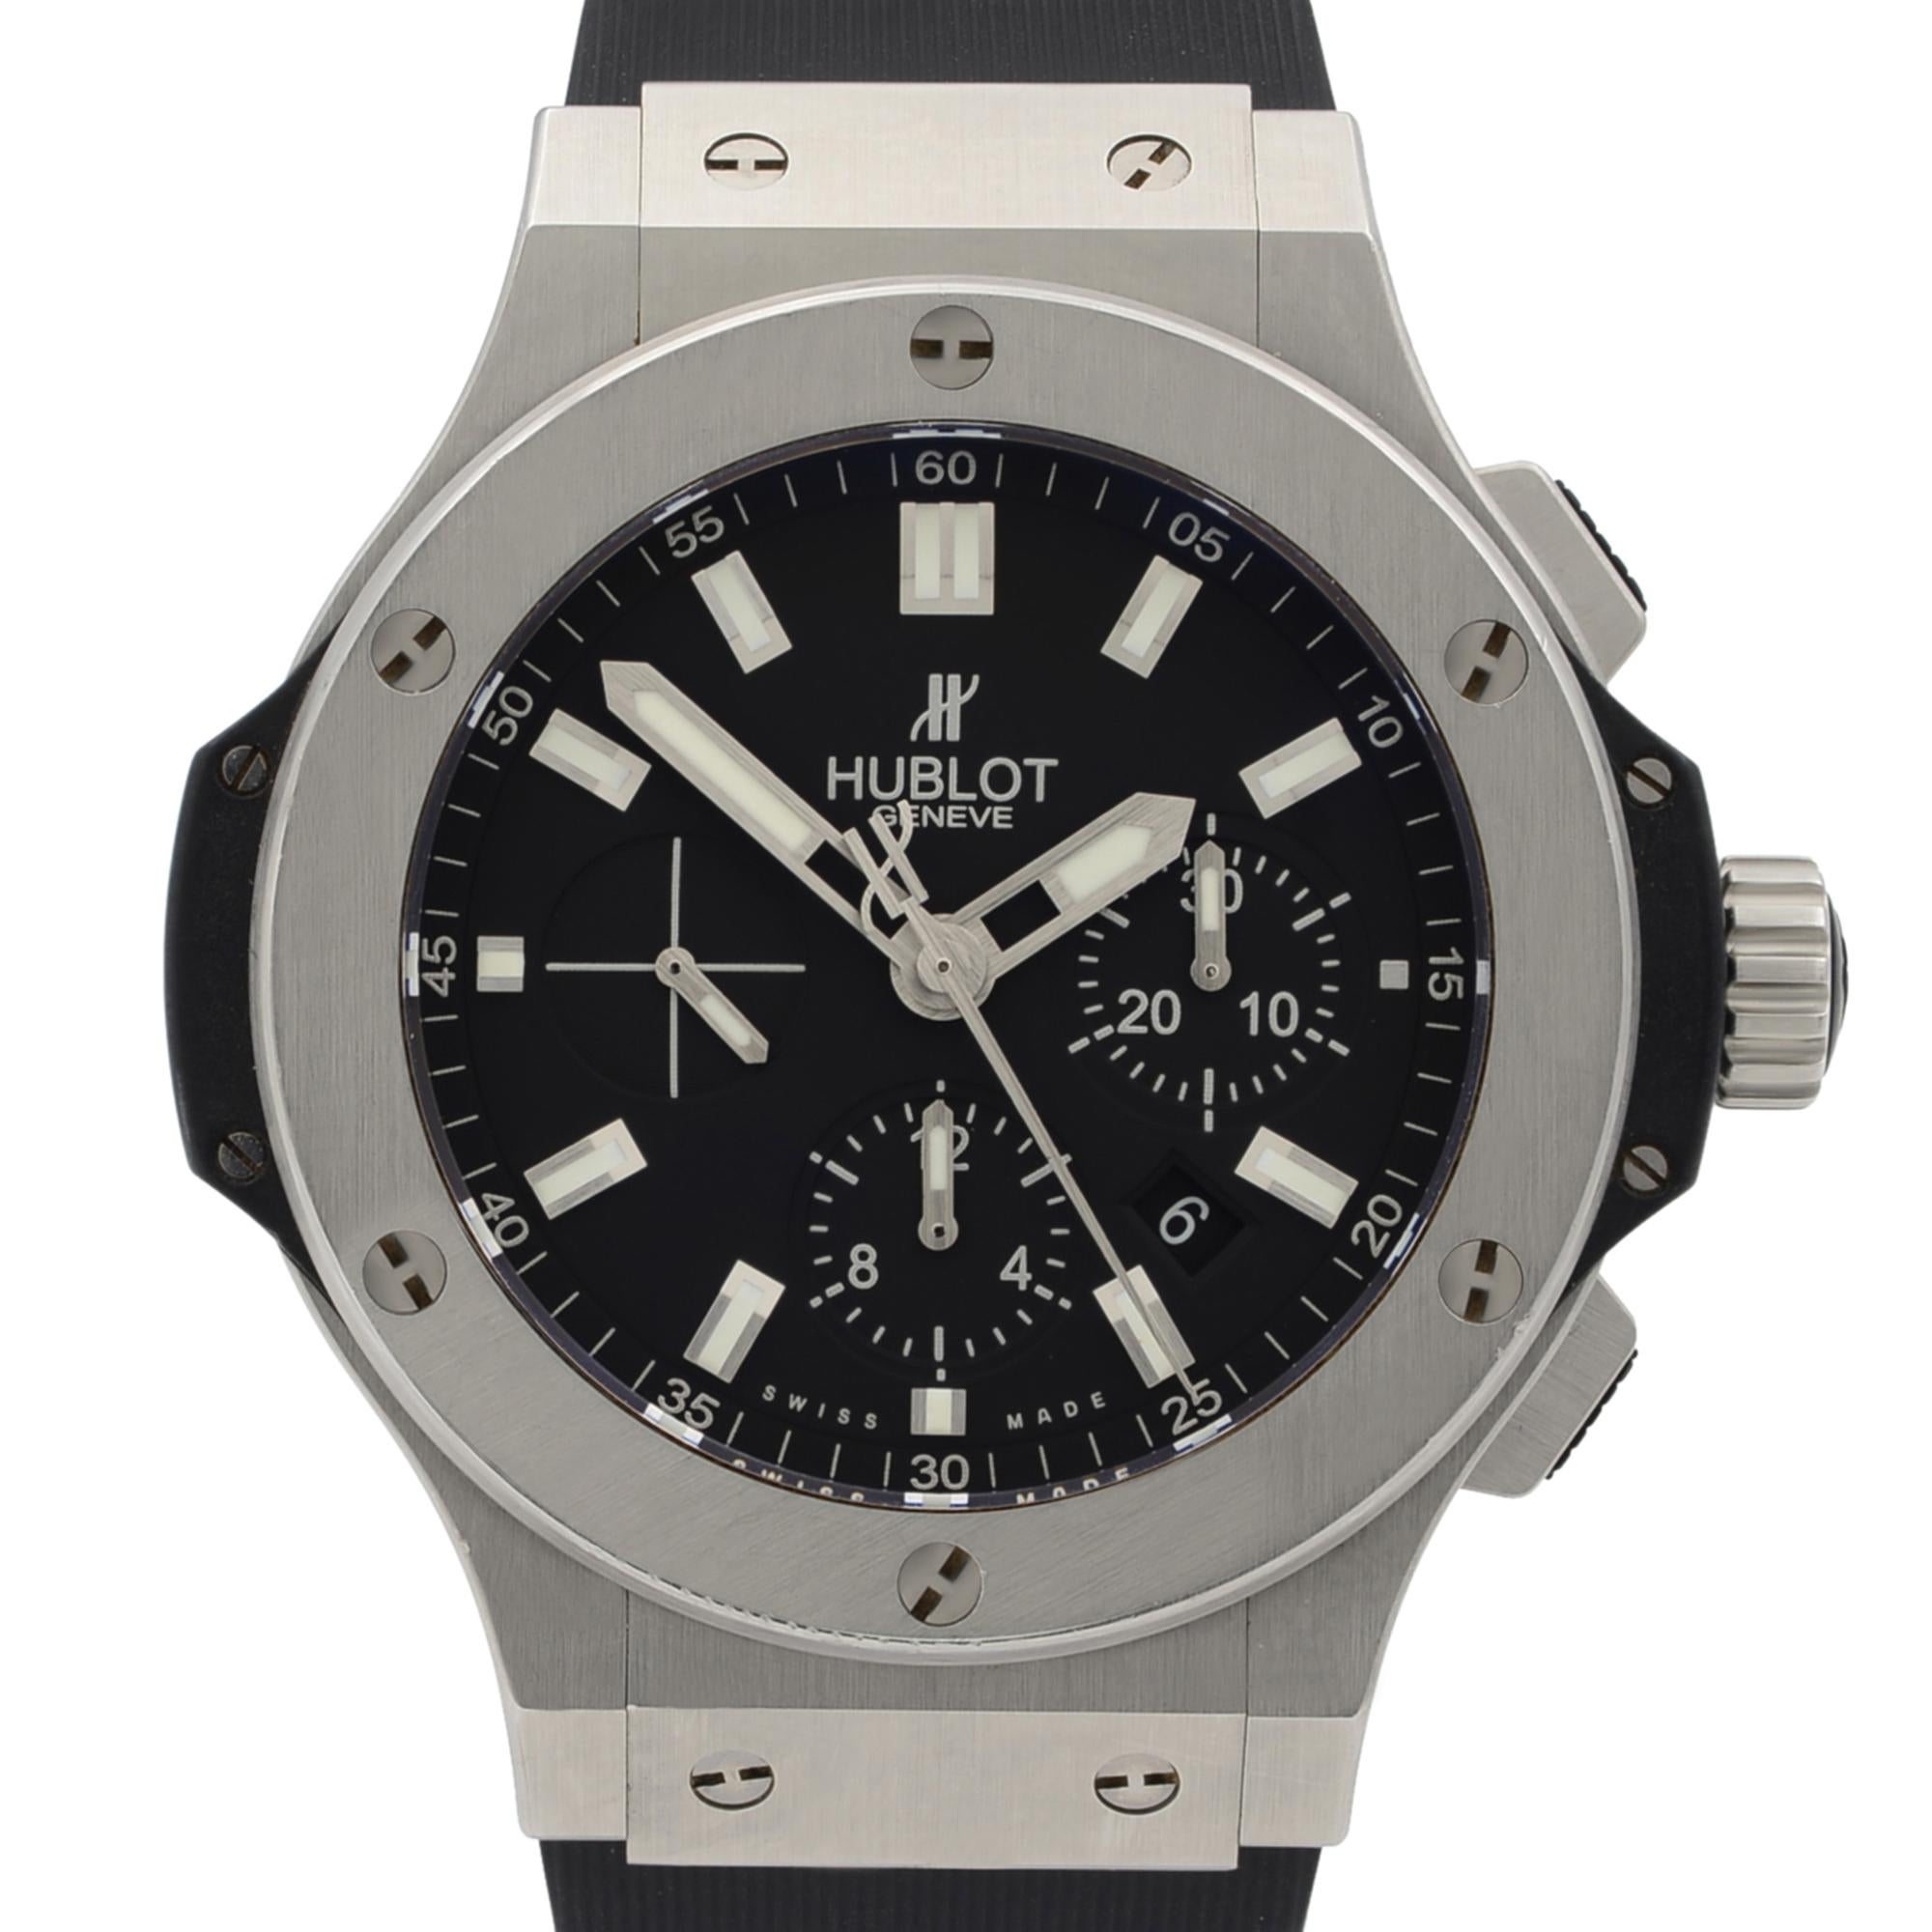 Pre-owned Excellent Condition. Brand New Hublot Band.  Comes with Original Box and Papers.  Covered By One Year Chronostyore Warranty. 
Details:
MSRP 12500
Model Number 301.SX.1170.RX
Brand Hublot
Department Men
Style Dress/Formal, Luxury
Model